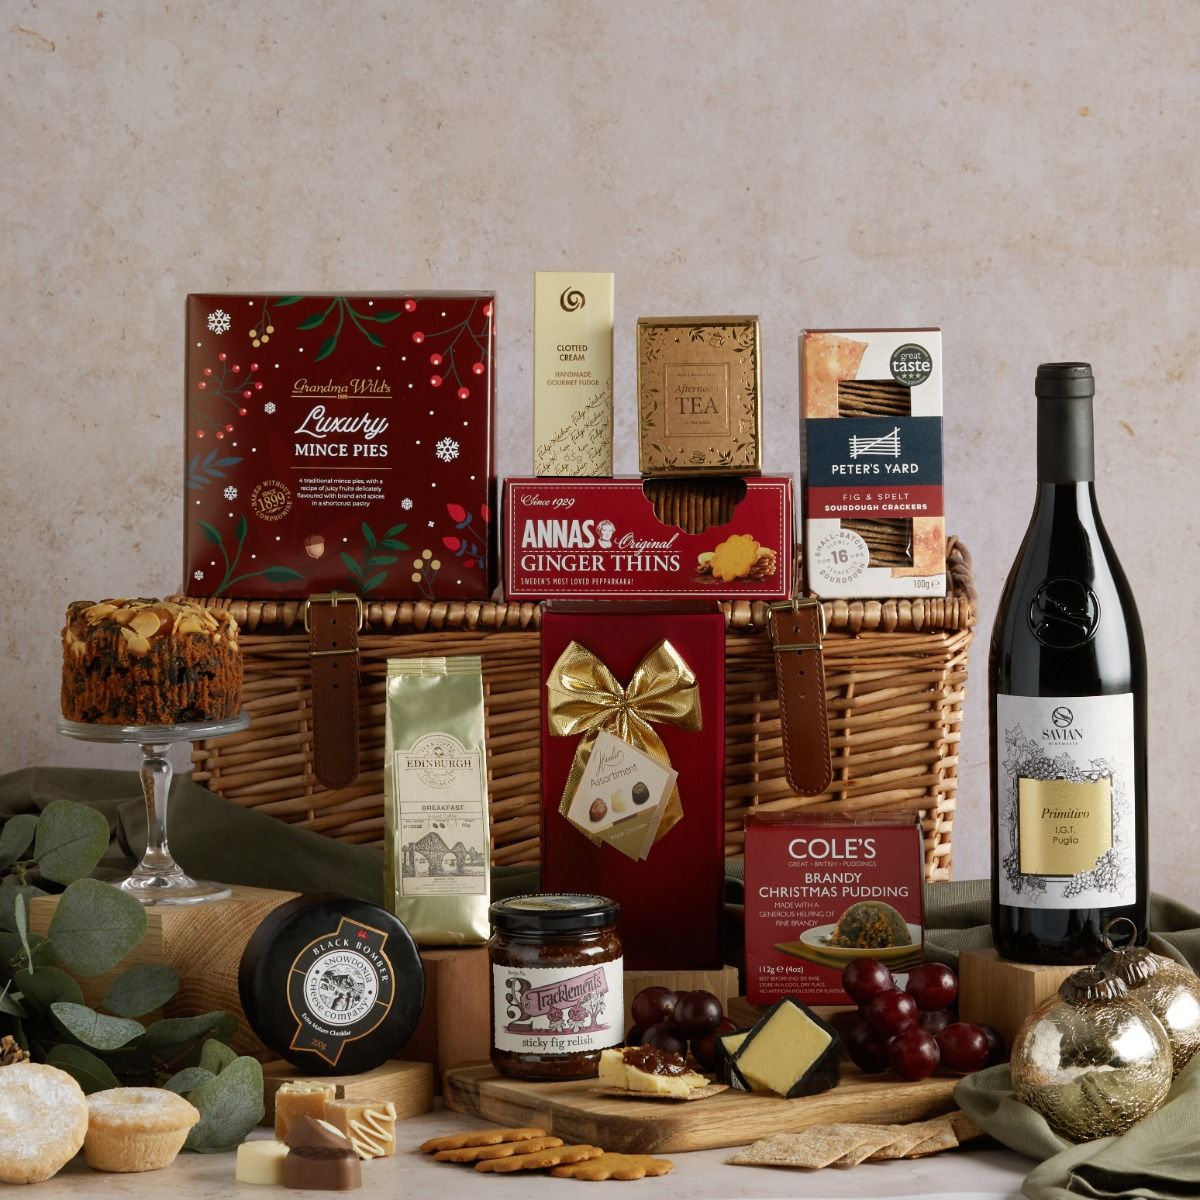 The Luxury Christmas Cracker hamper with contents on display including wicker basket